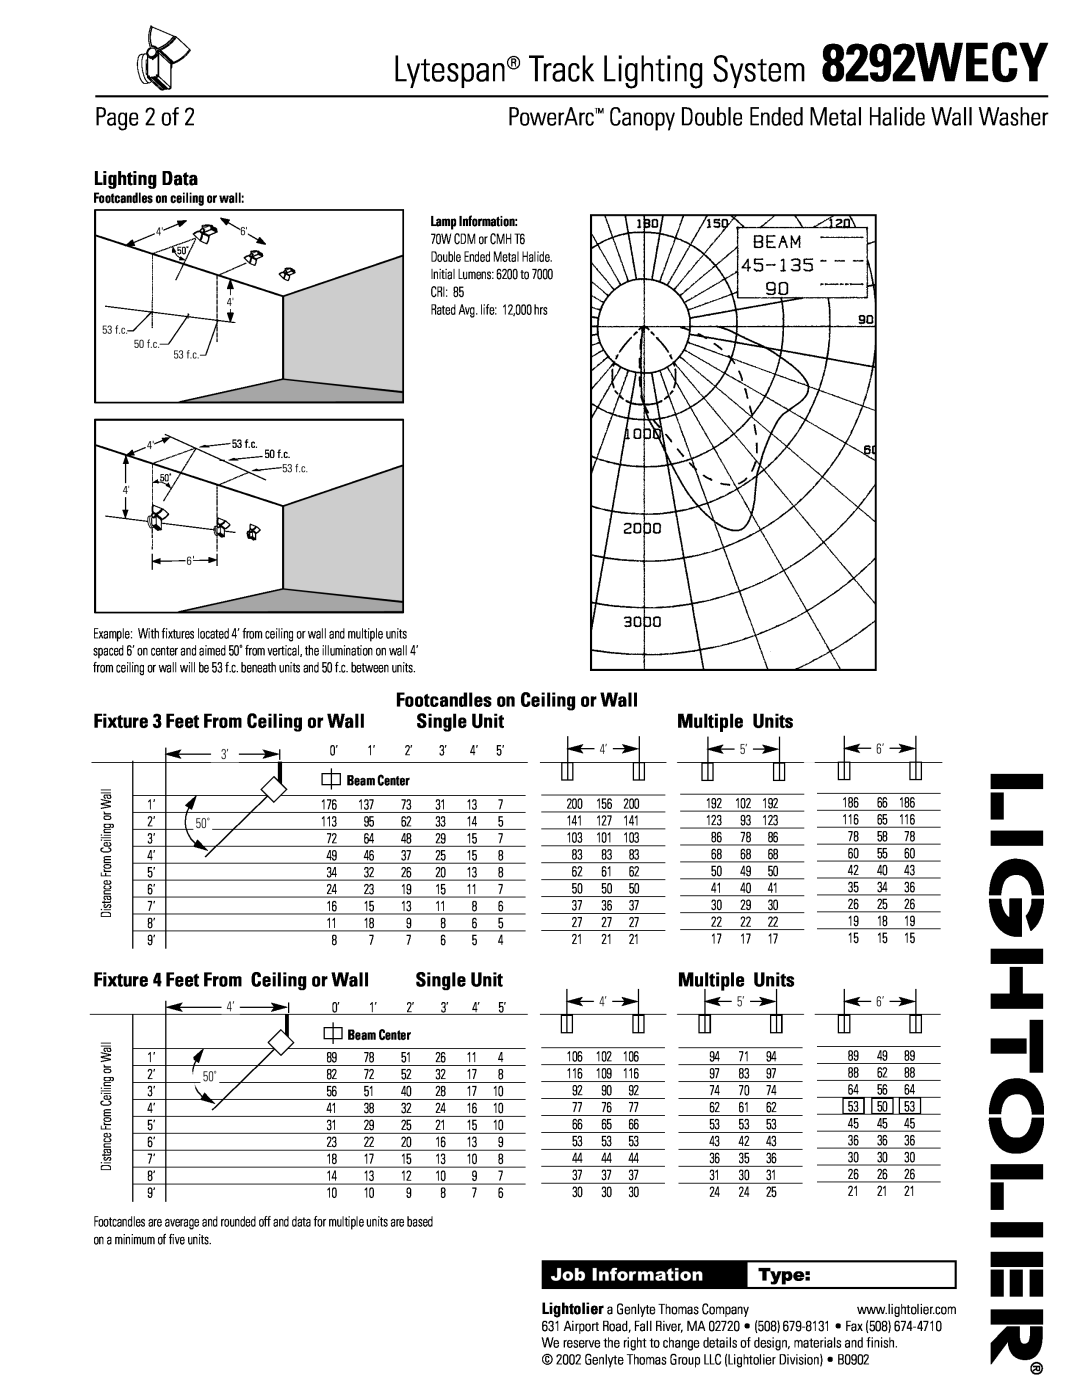 Lightolier 8292WECY manual Page 2 of, Lighting Data, Single Unit, Multiple Units, Fixture 3 Feet From Ceiling or Wall, Type 